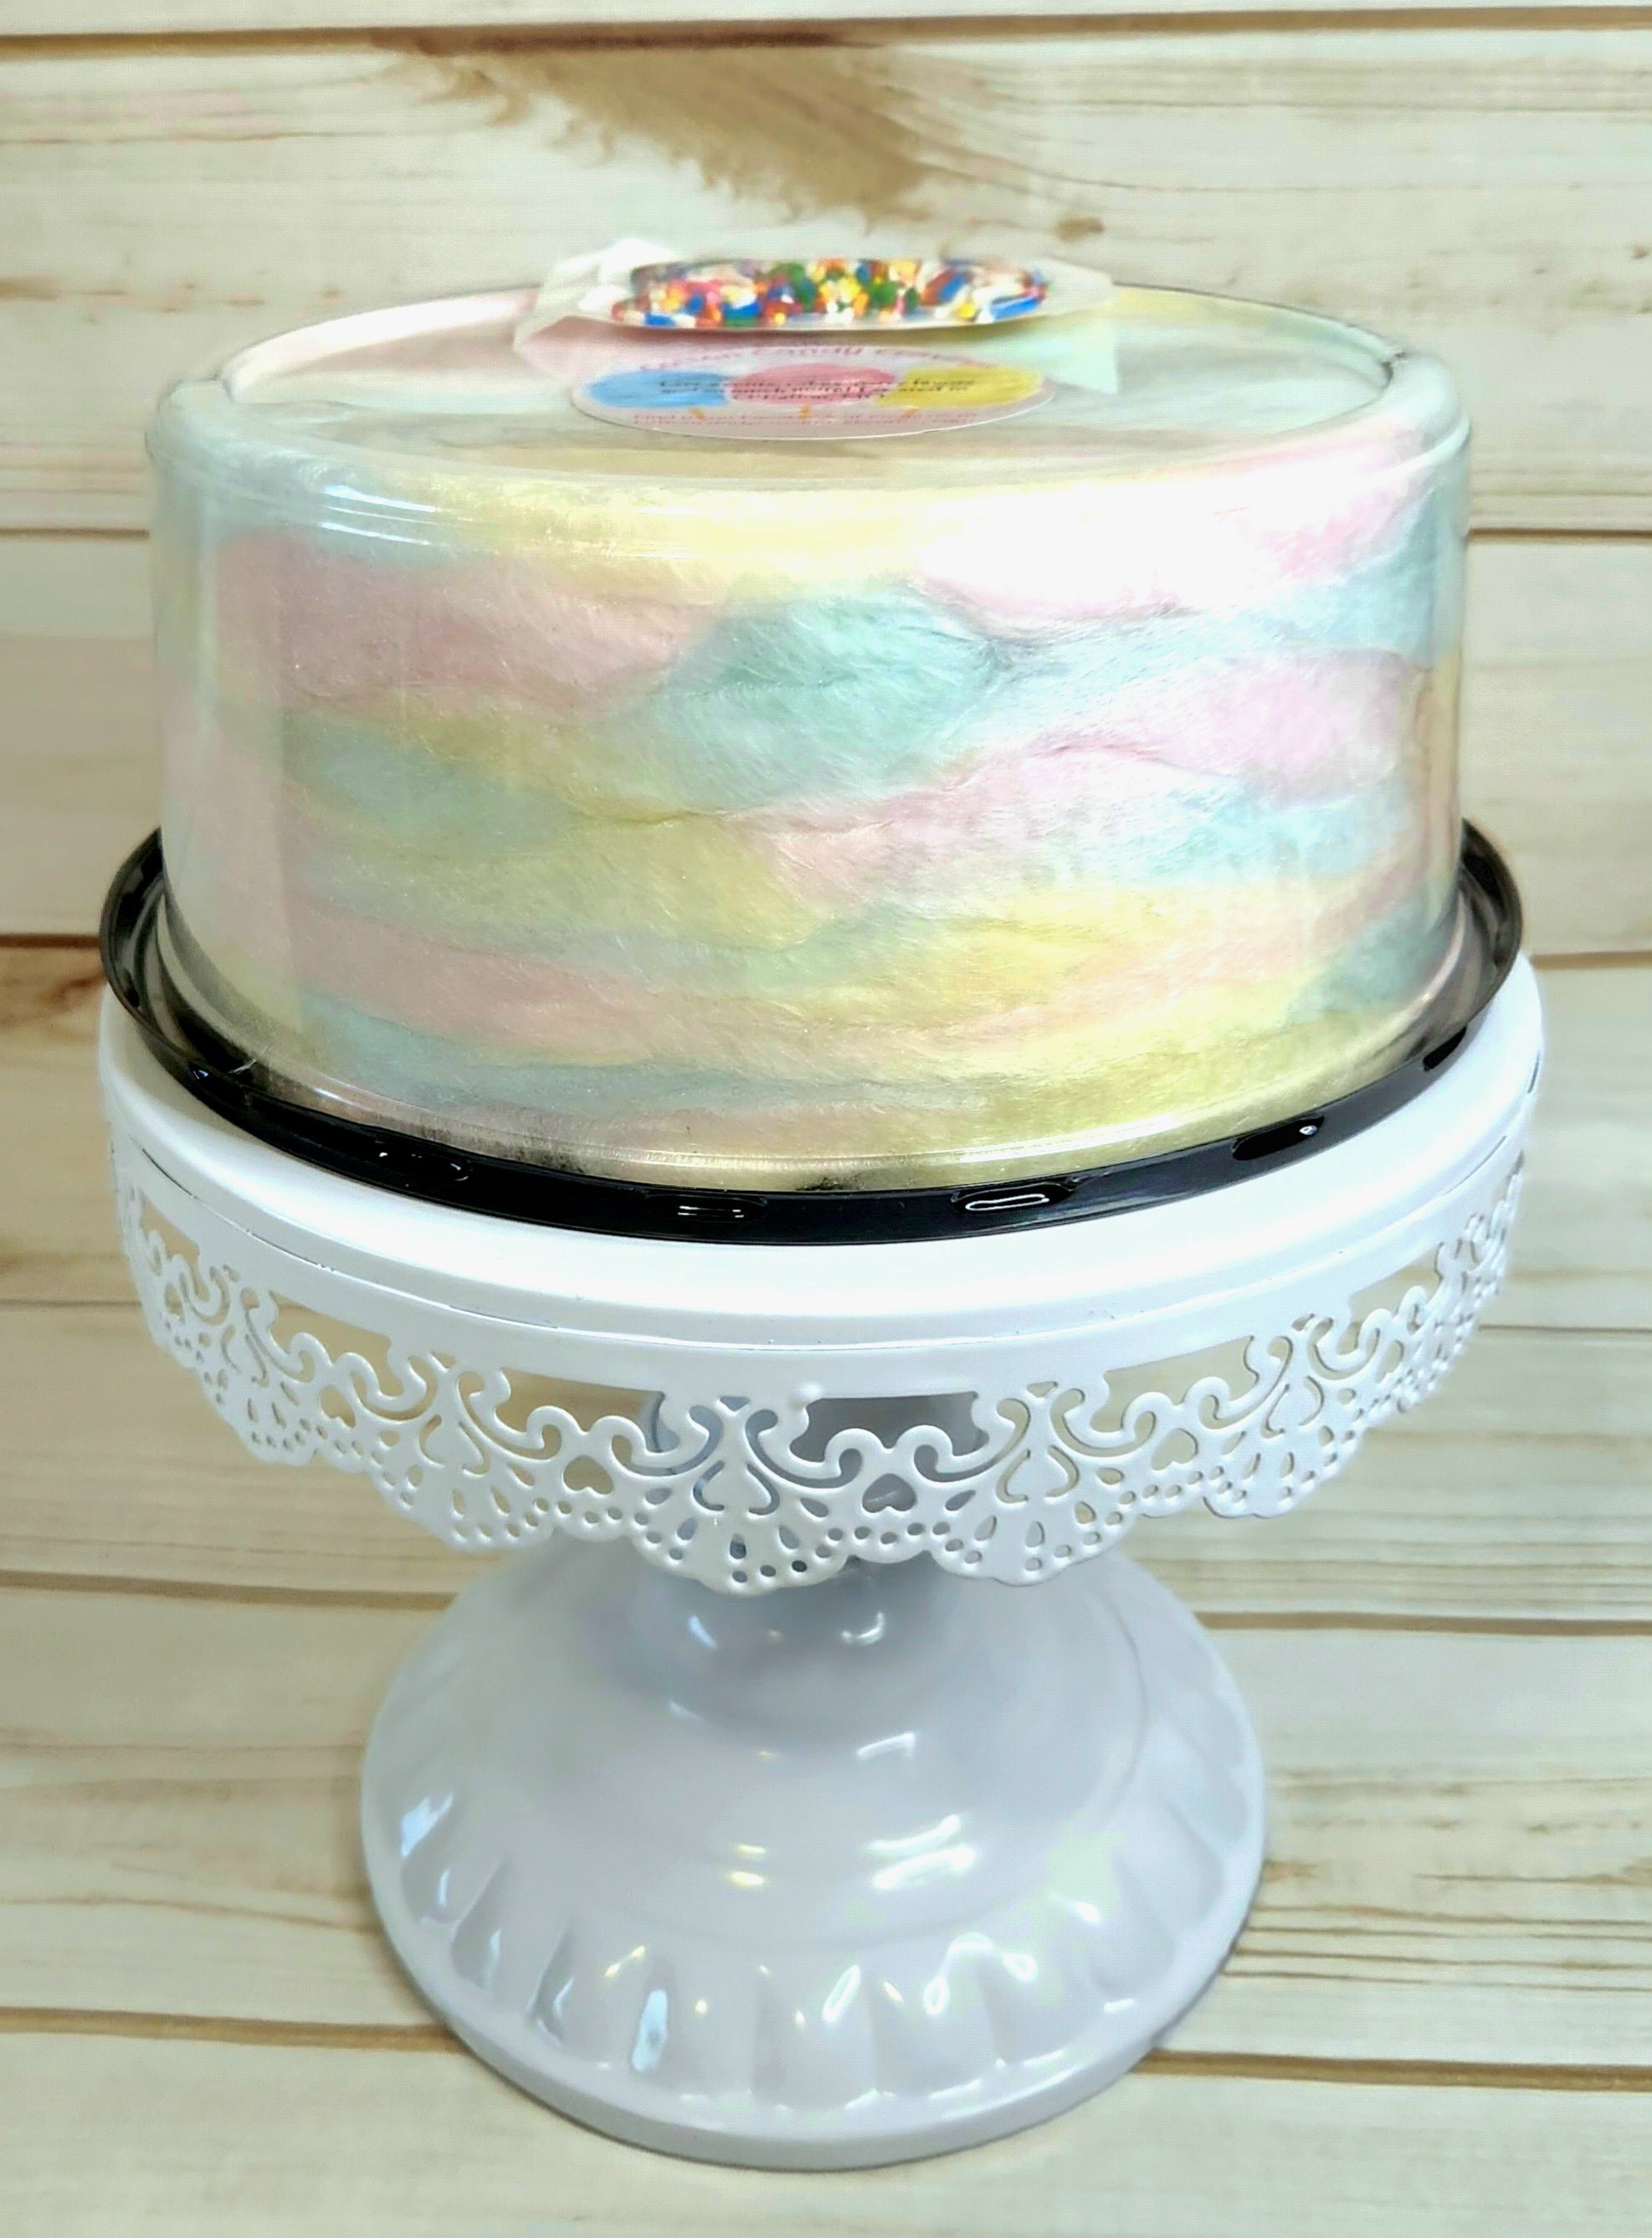 Tie Dye Cake - Hayley Cakes and Cookies Hayley Cakes and Cookies